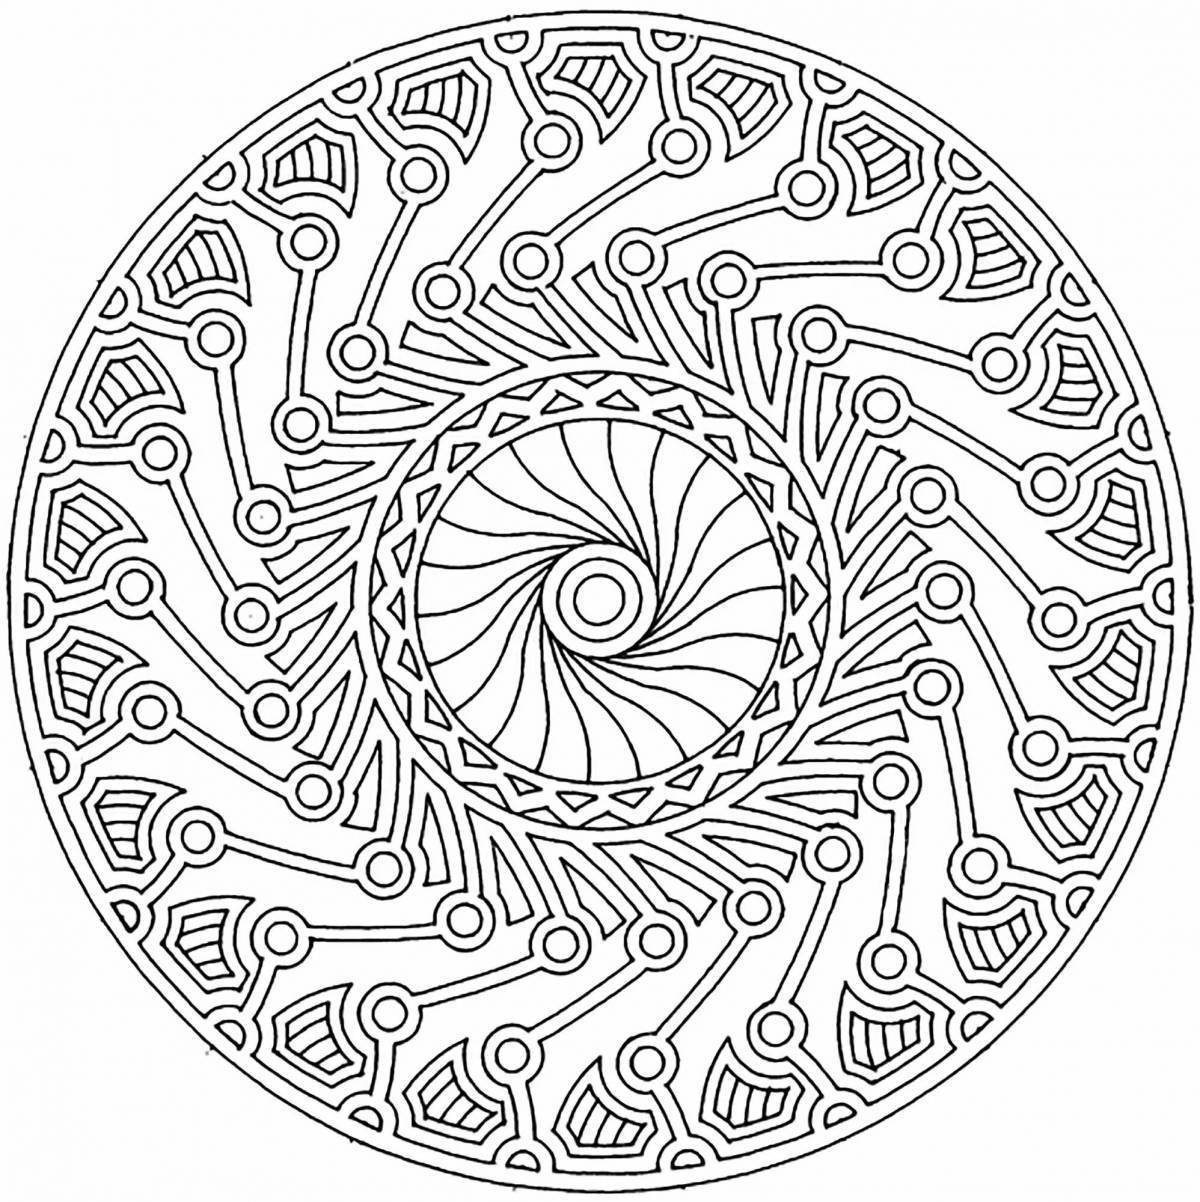 A fun spiral coloring book for kids